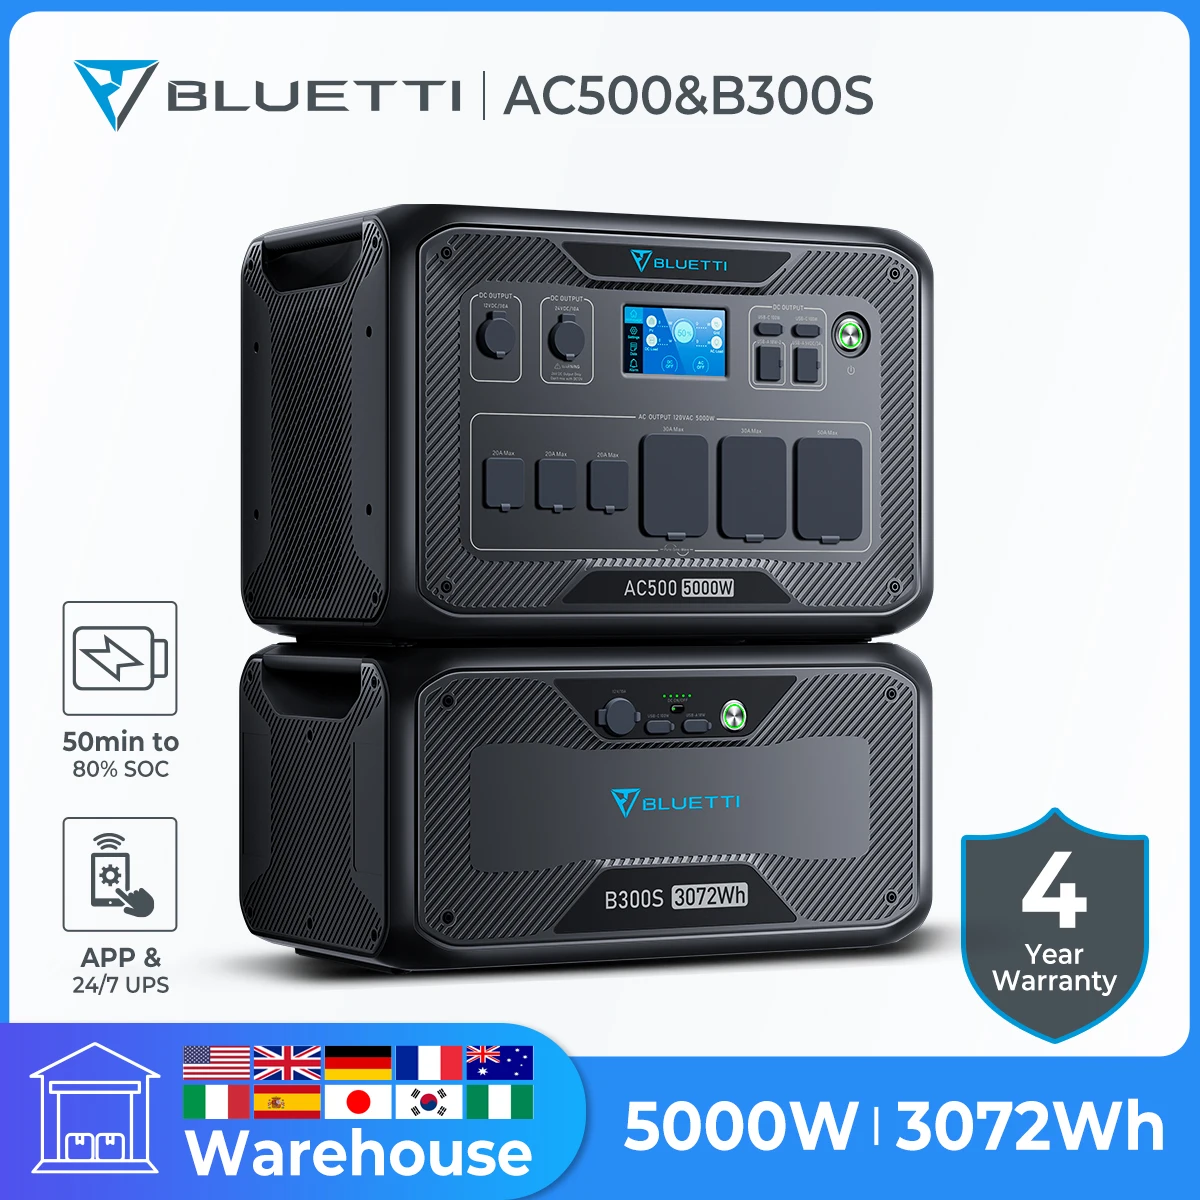 

BLUETTI AC500+B300S 5000W Solar Power Station For Home 3072Wh Expansion Battery LiFePO4 Backup For Home Complete Kit Emergency